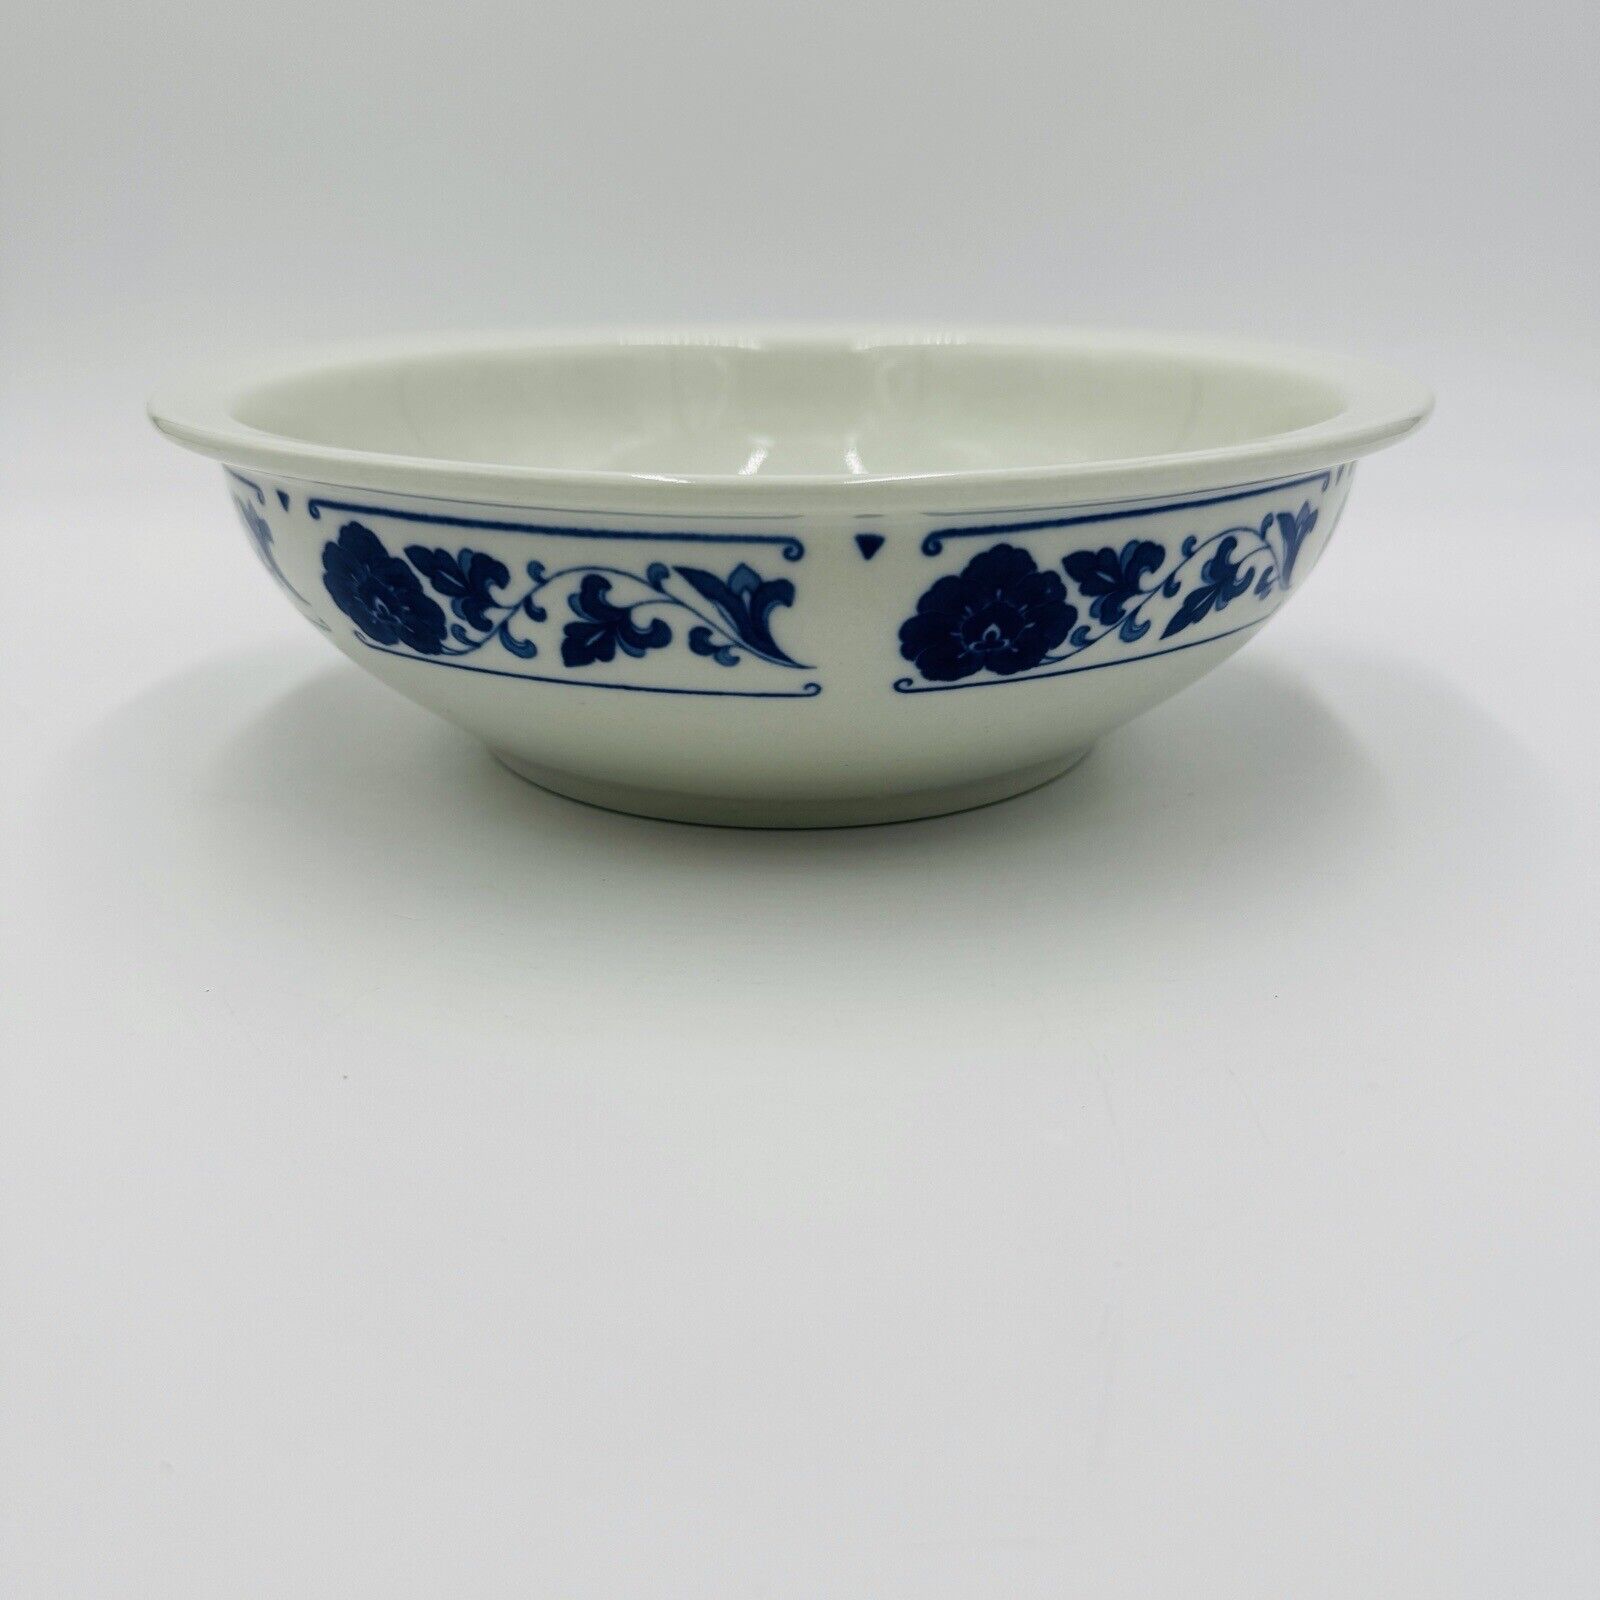 Han Dan Blue and White Chinese Bowl Dragon Marking 3in x 10in Vintage